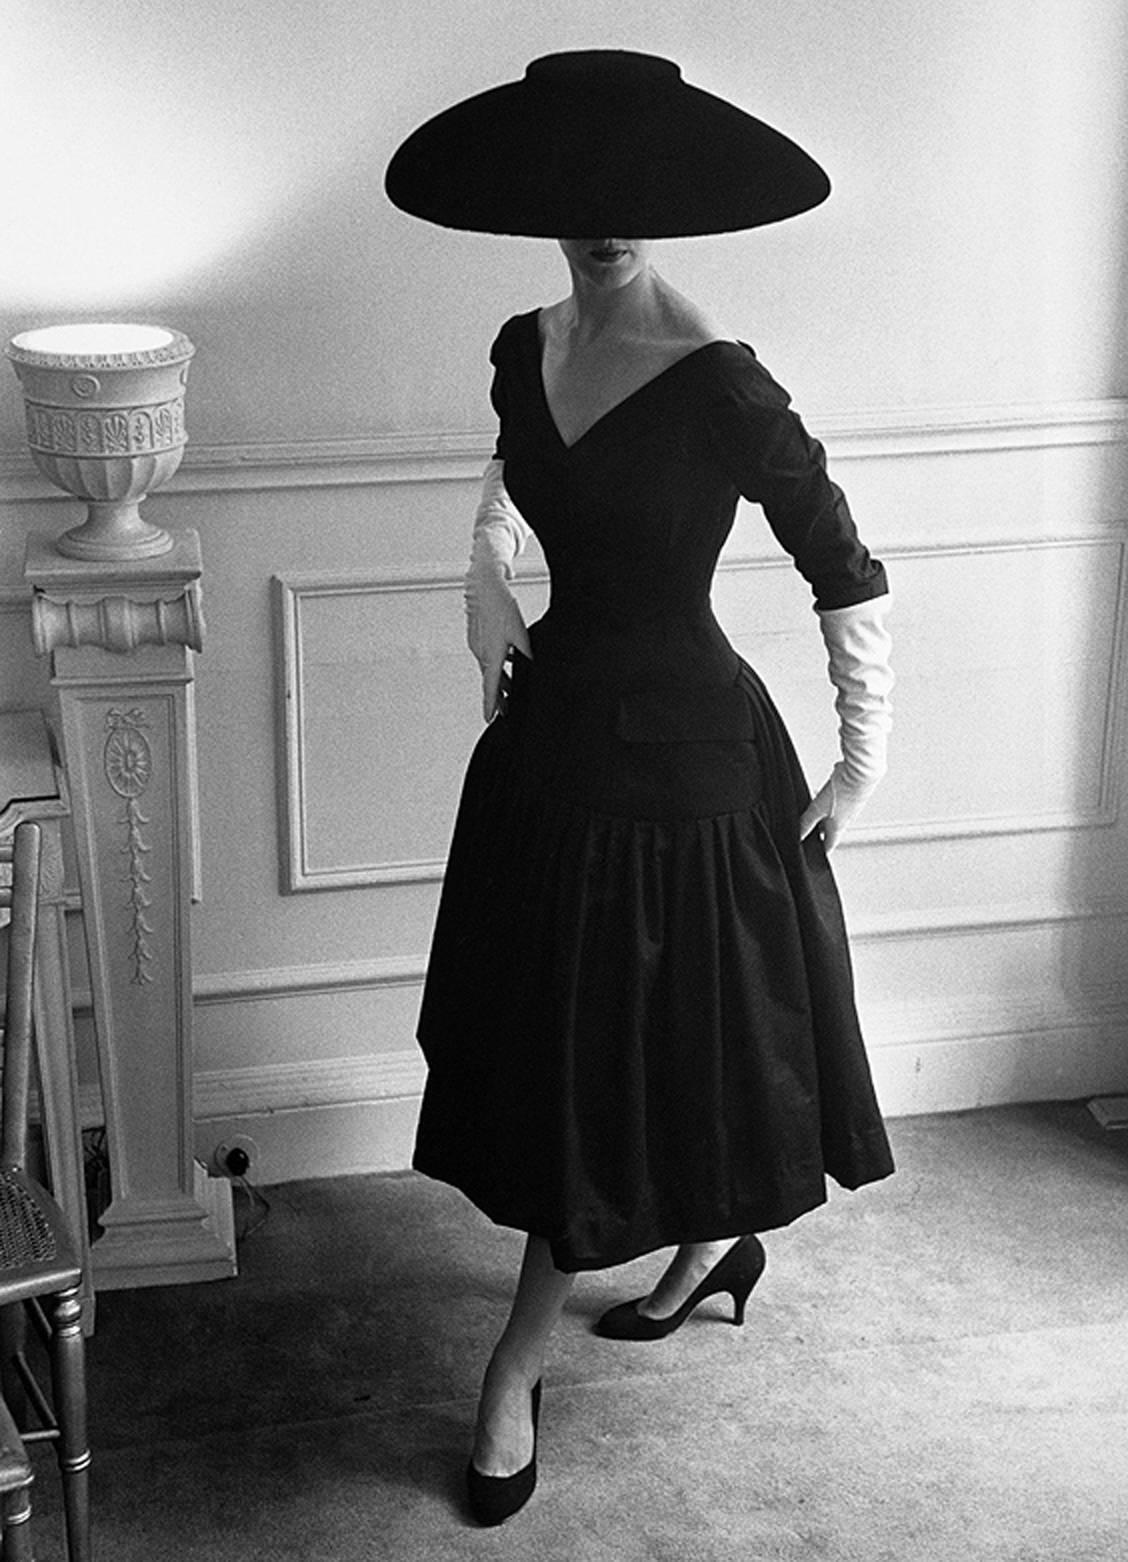 The House of Dior has been an enduring icon of Haute-Couture. While the House of Dior is still a thriving business today, Dior's untimely death in 1957 left the fashion world without a great dictator of style. Christian Dior designed under his own